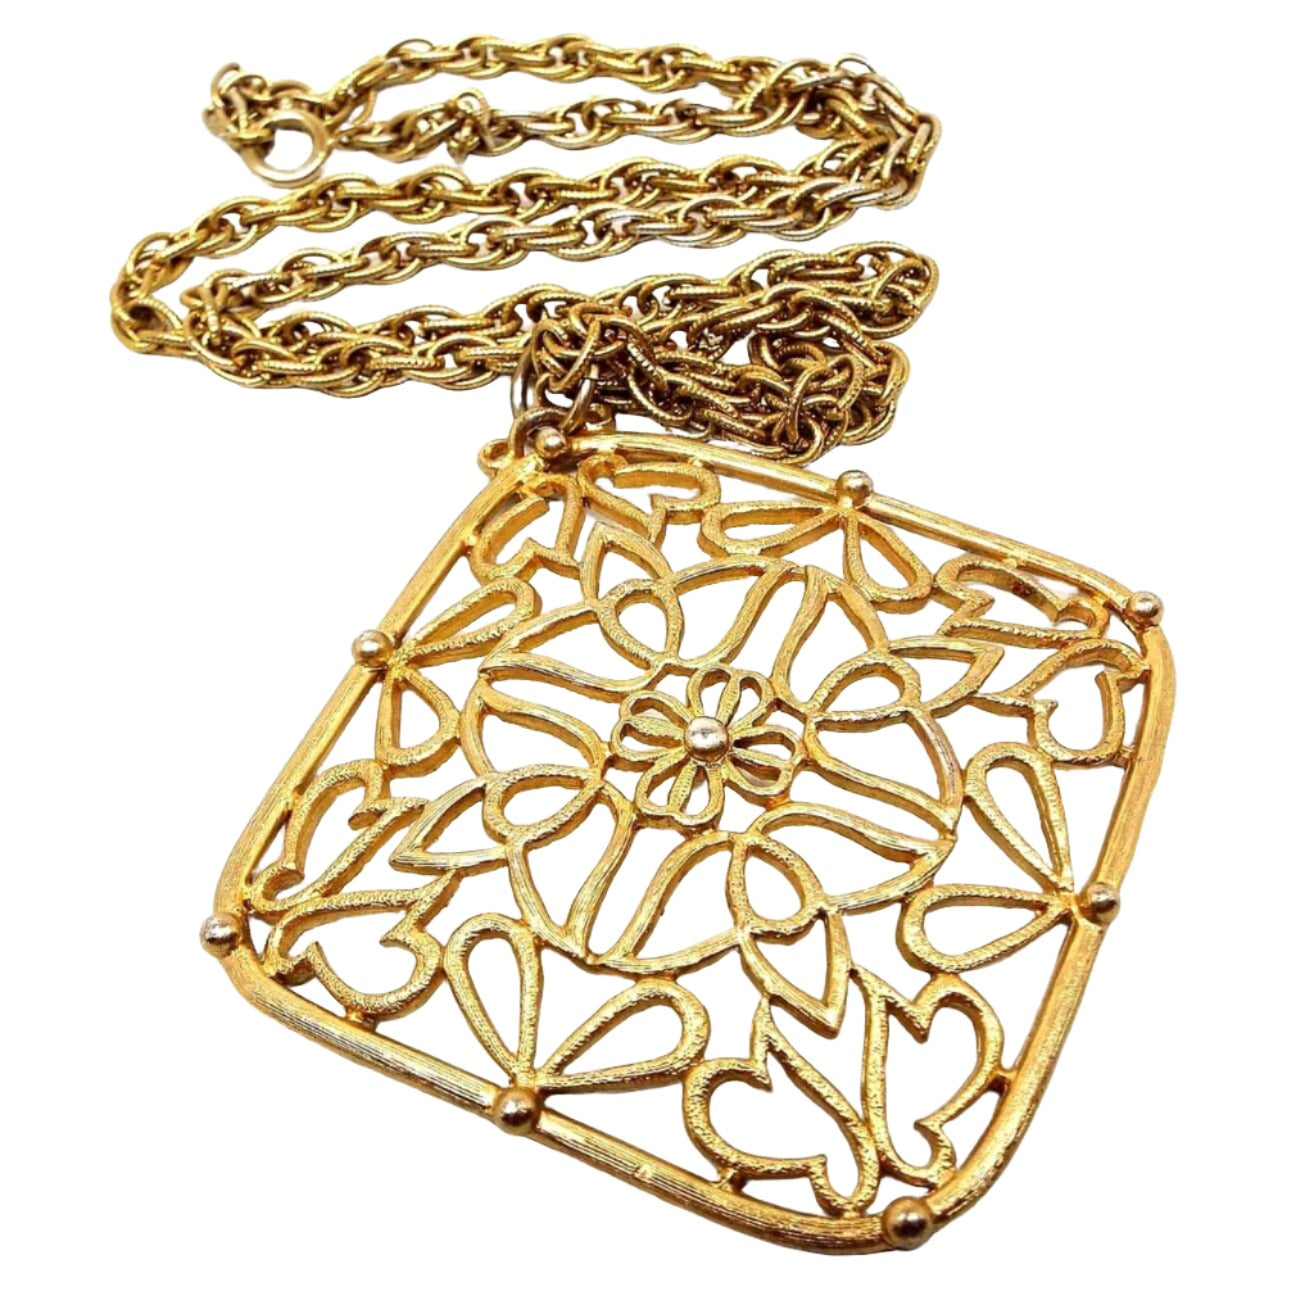 Front view of the retro vintage JJ pendant necklace. The metal is gold tone in color. There is a twisted rope chain with a spring ring clasp. The large pendant is square shaped hanging from one of the corners and h as a filigree design with a small flower in the middle.